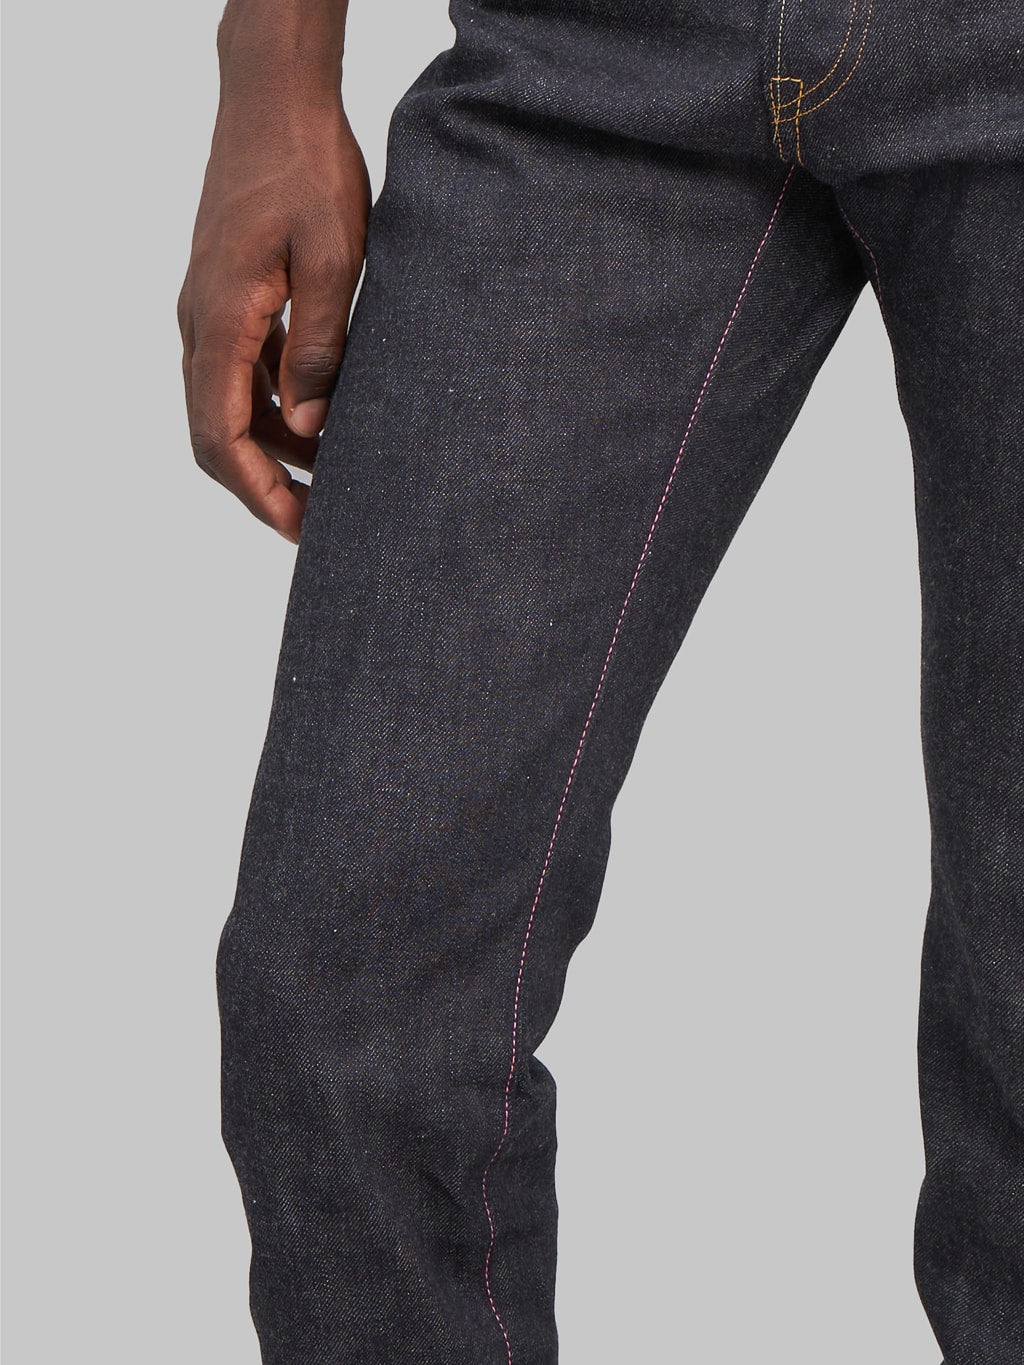 Momotaro 0405 12 going to batle 12oz high Tapered Jeans inseam